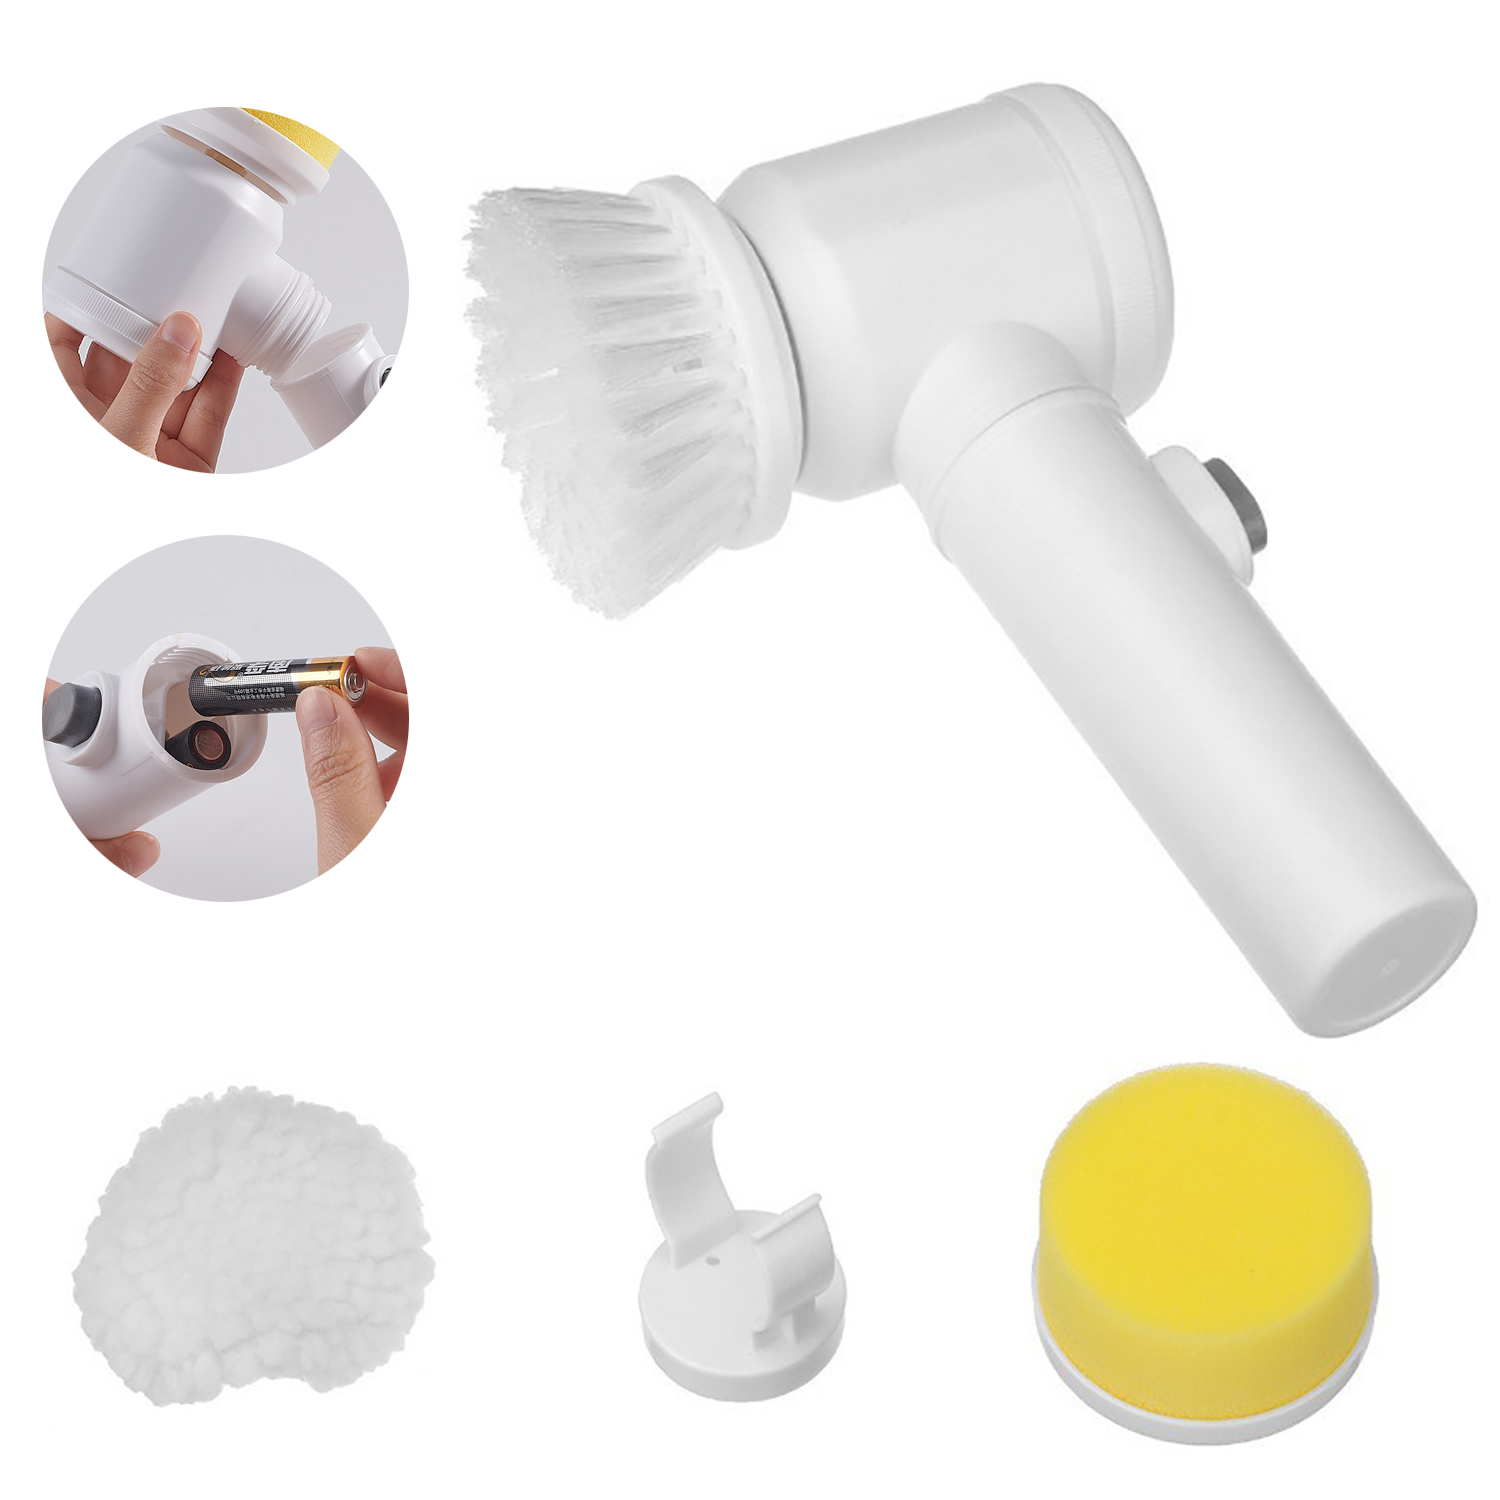 Handheld Bathtub Electric Brush Cleaner Scrubber for Kitchen Bathroom Cordless Cleaning Tool